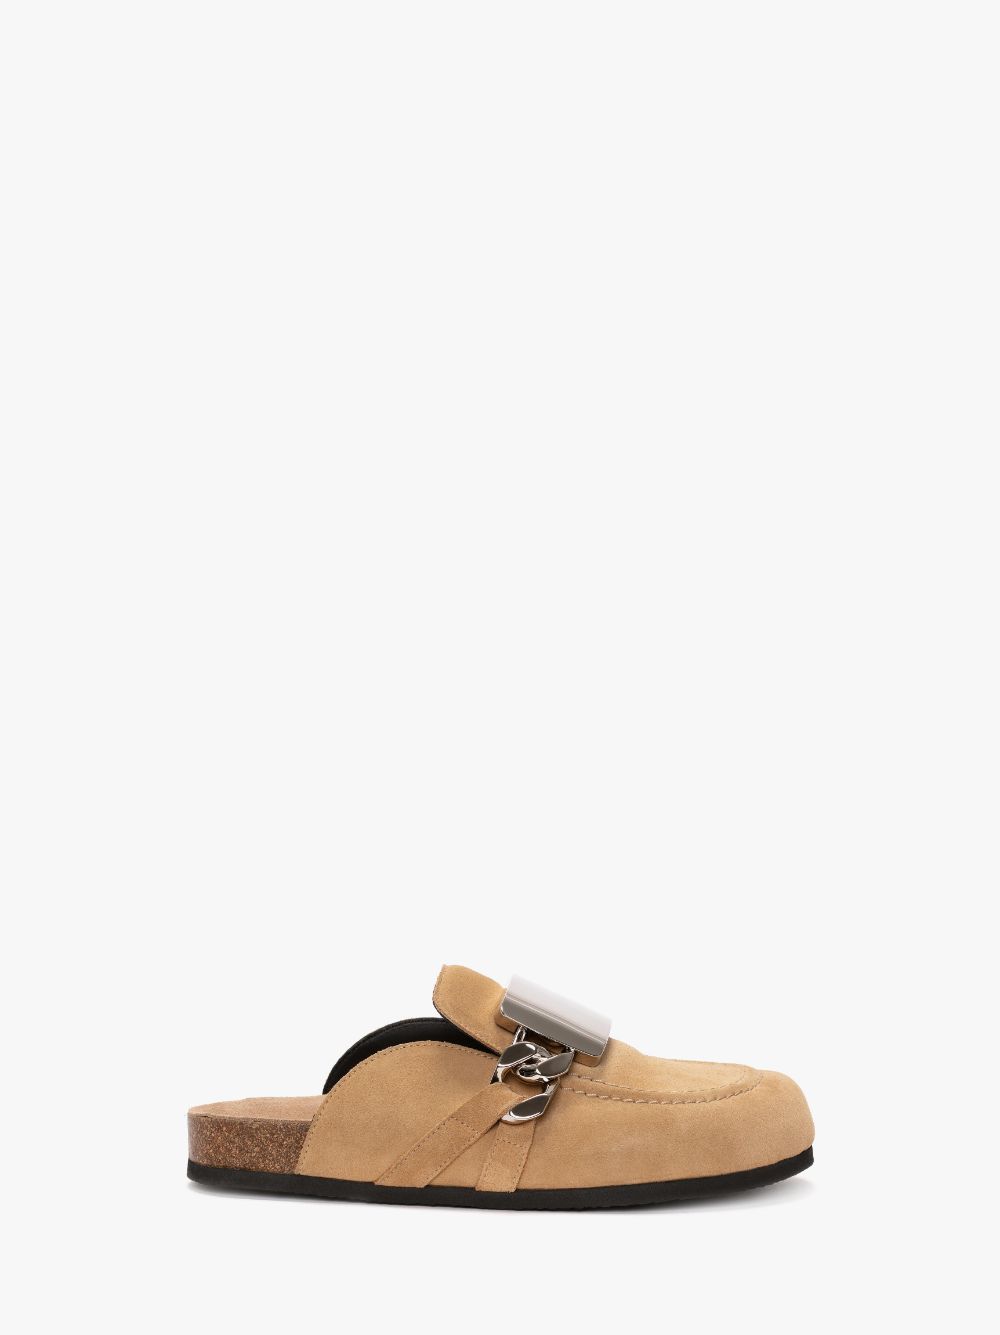 JW ANDERSON GOURMET CHAIN LOAFER MULES